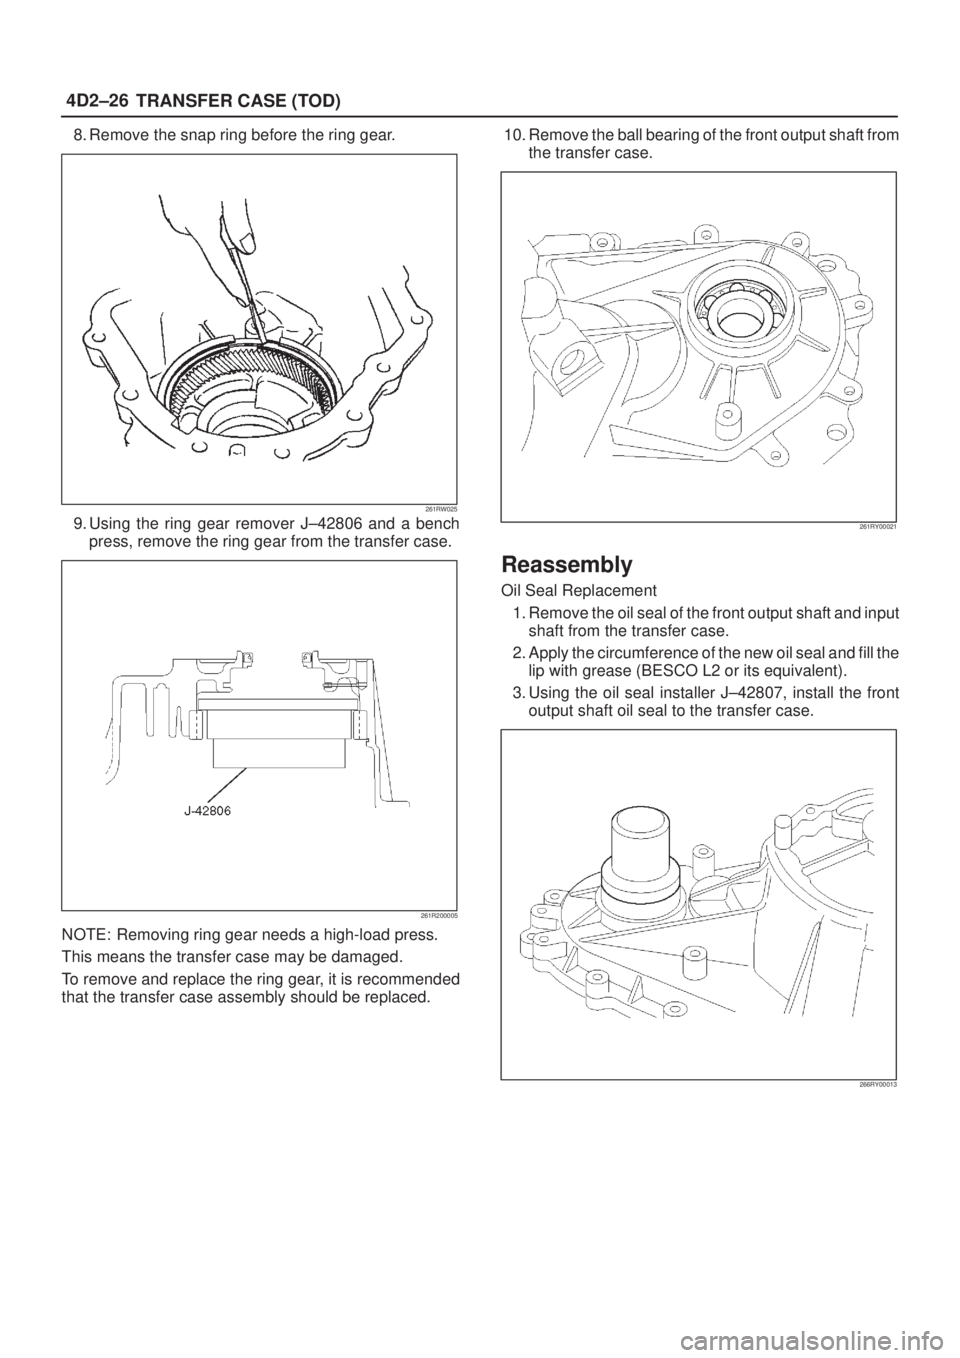 ISUZU AXIOM 2002  Service Repair Manual 4D2±26
TRANSFER CASE (TOD)
8. Remove the snap ring before the ring gear.
261RW025
9. Using the ring gear remover J±42806 and a bench
press, remove the ring gear from the transfer case.
261R200005
NO